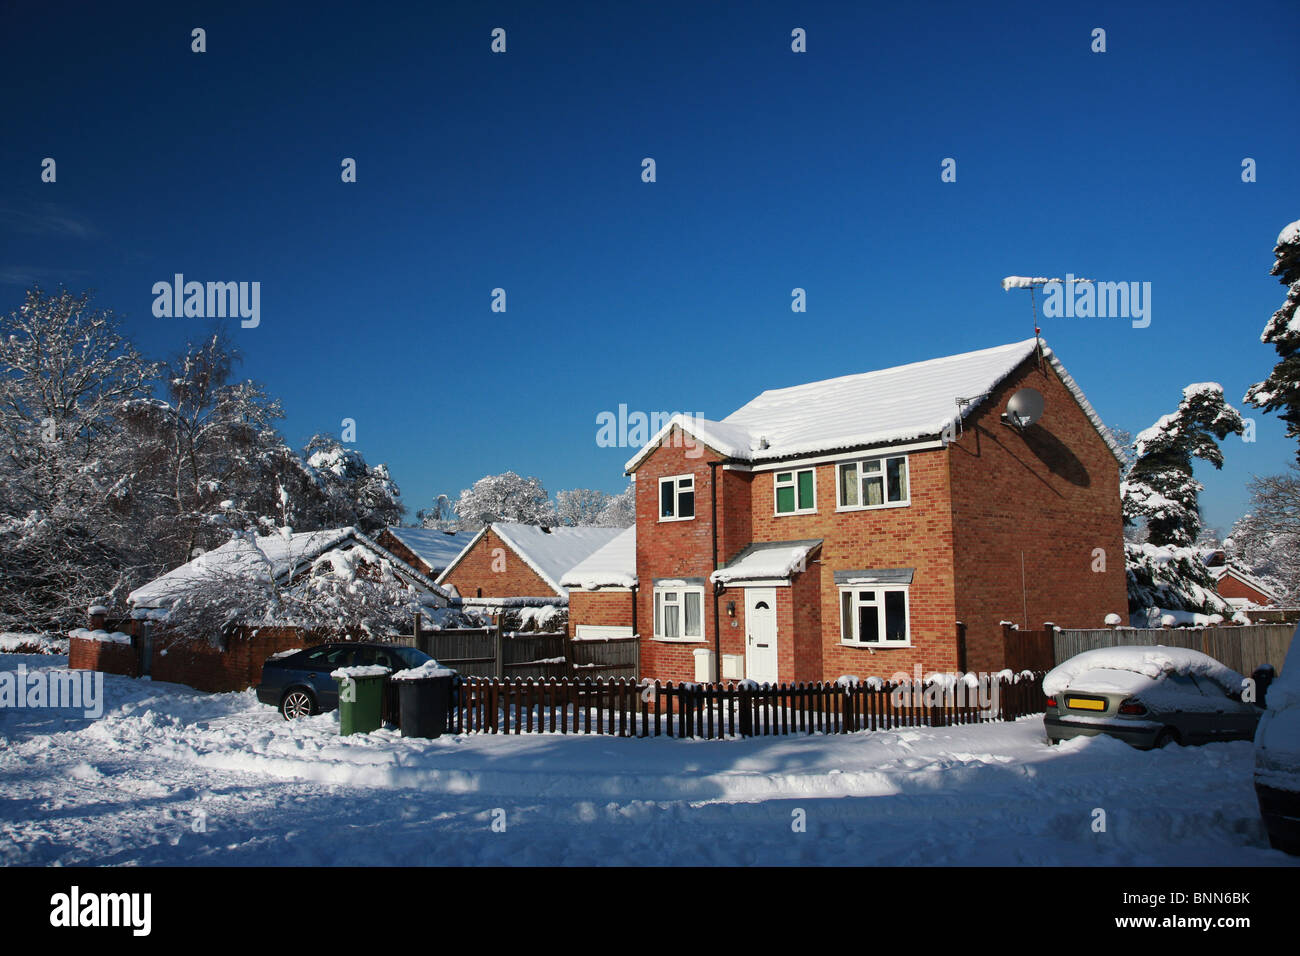 Modern English detached house in snow, taken during the big freeze in January 2010. Taken in Hampshire, England. Stock Photo